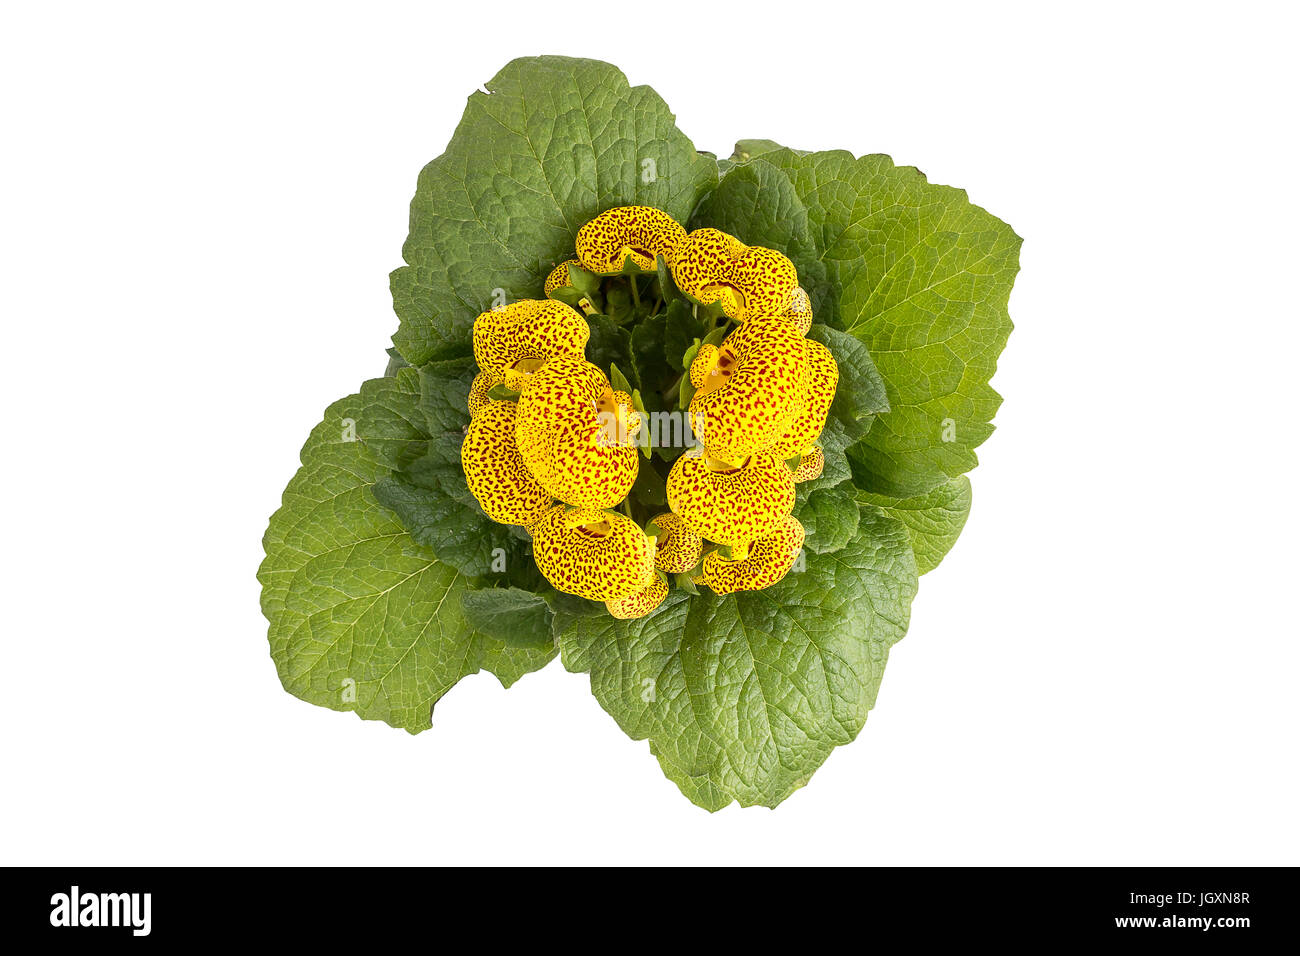 Lady's purse, slipper flower, Calceolaria Herbeohybrida, top view isolated on white Stock Photo